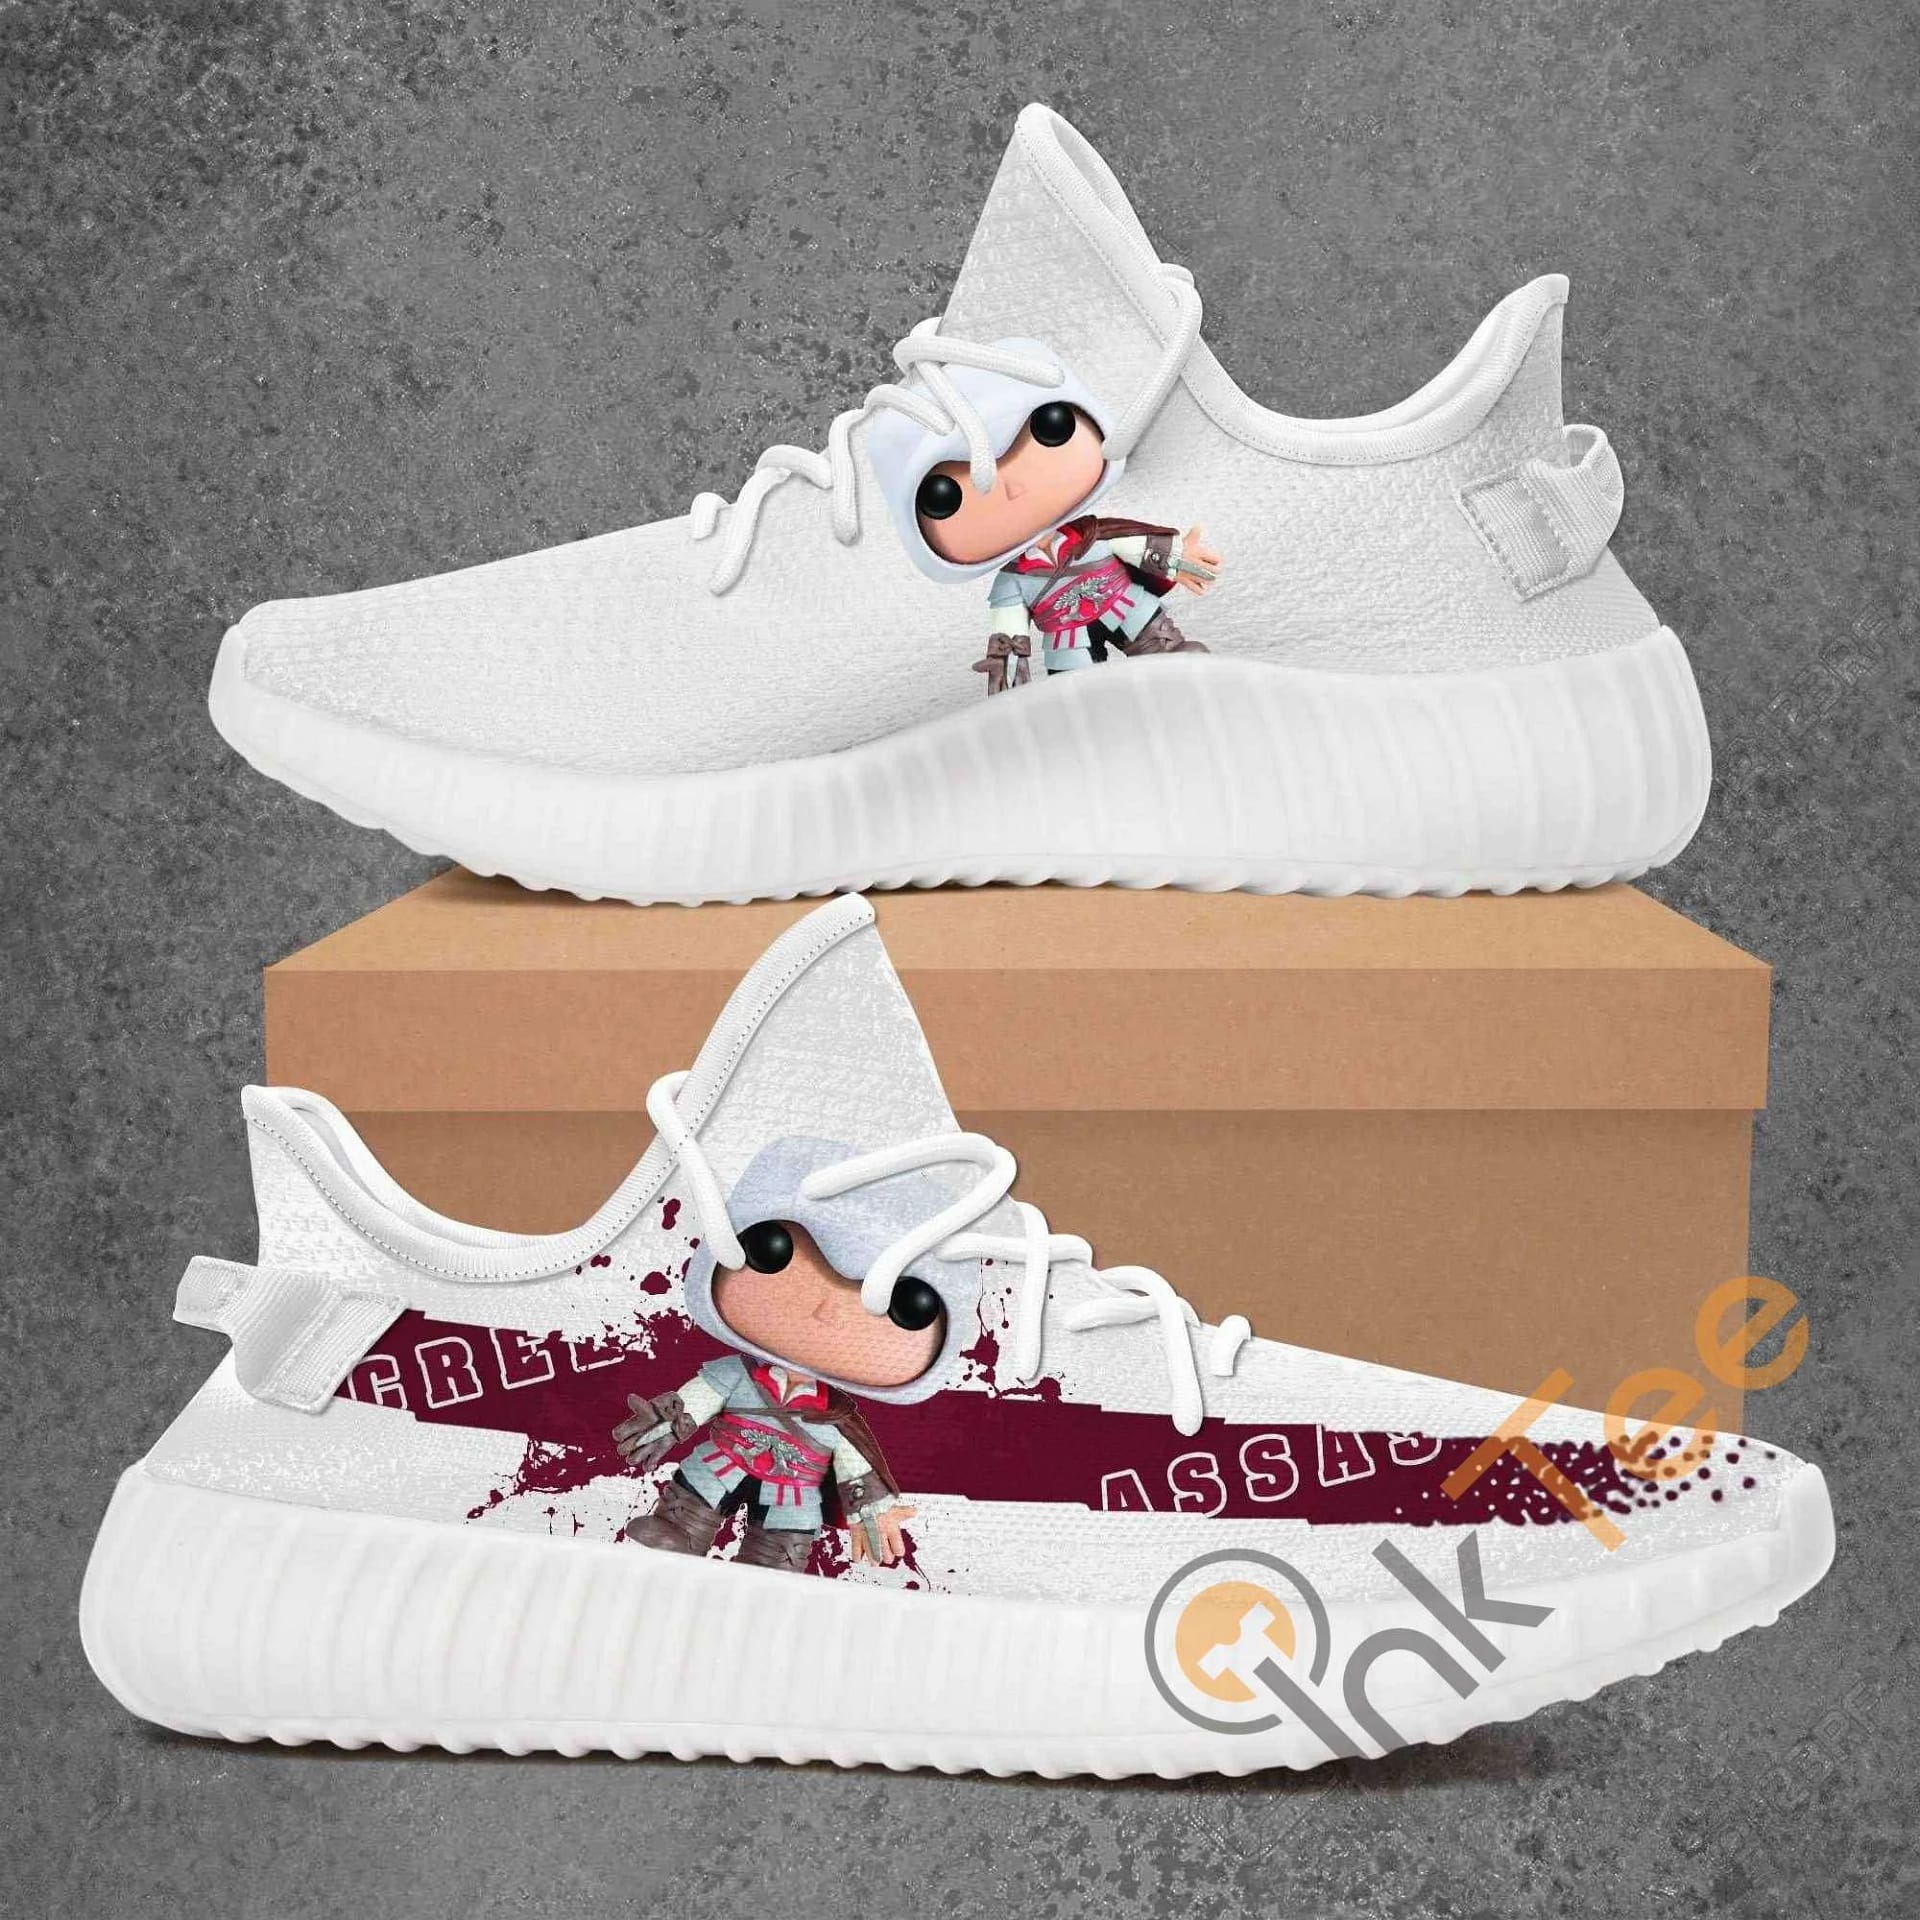 Assassins Creed Amazon Best Selling Yeezy Boost